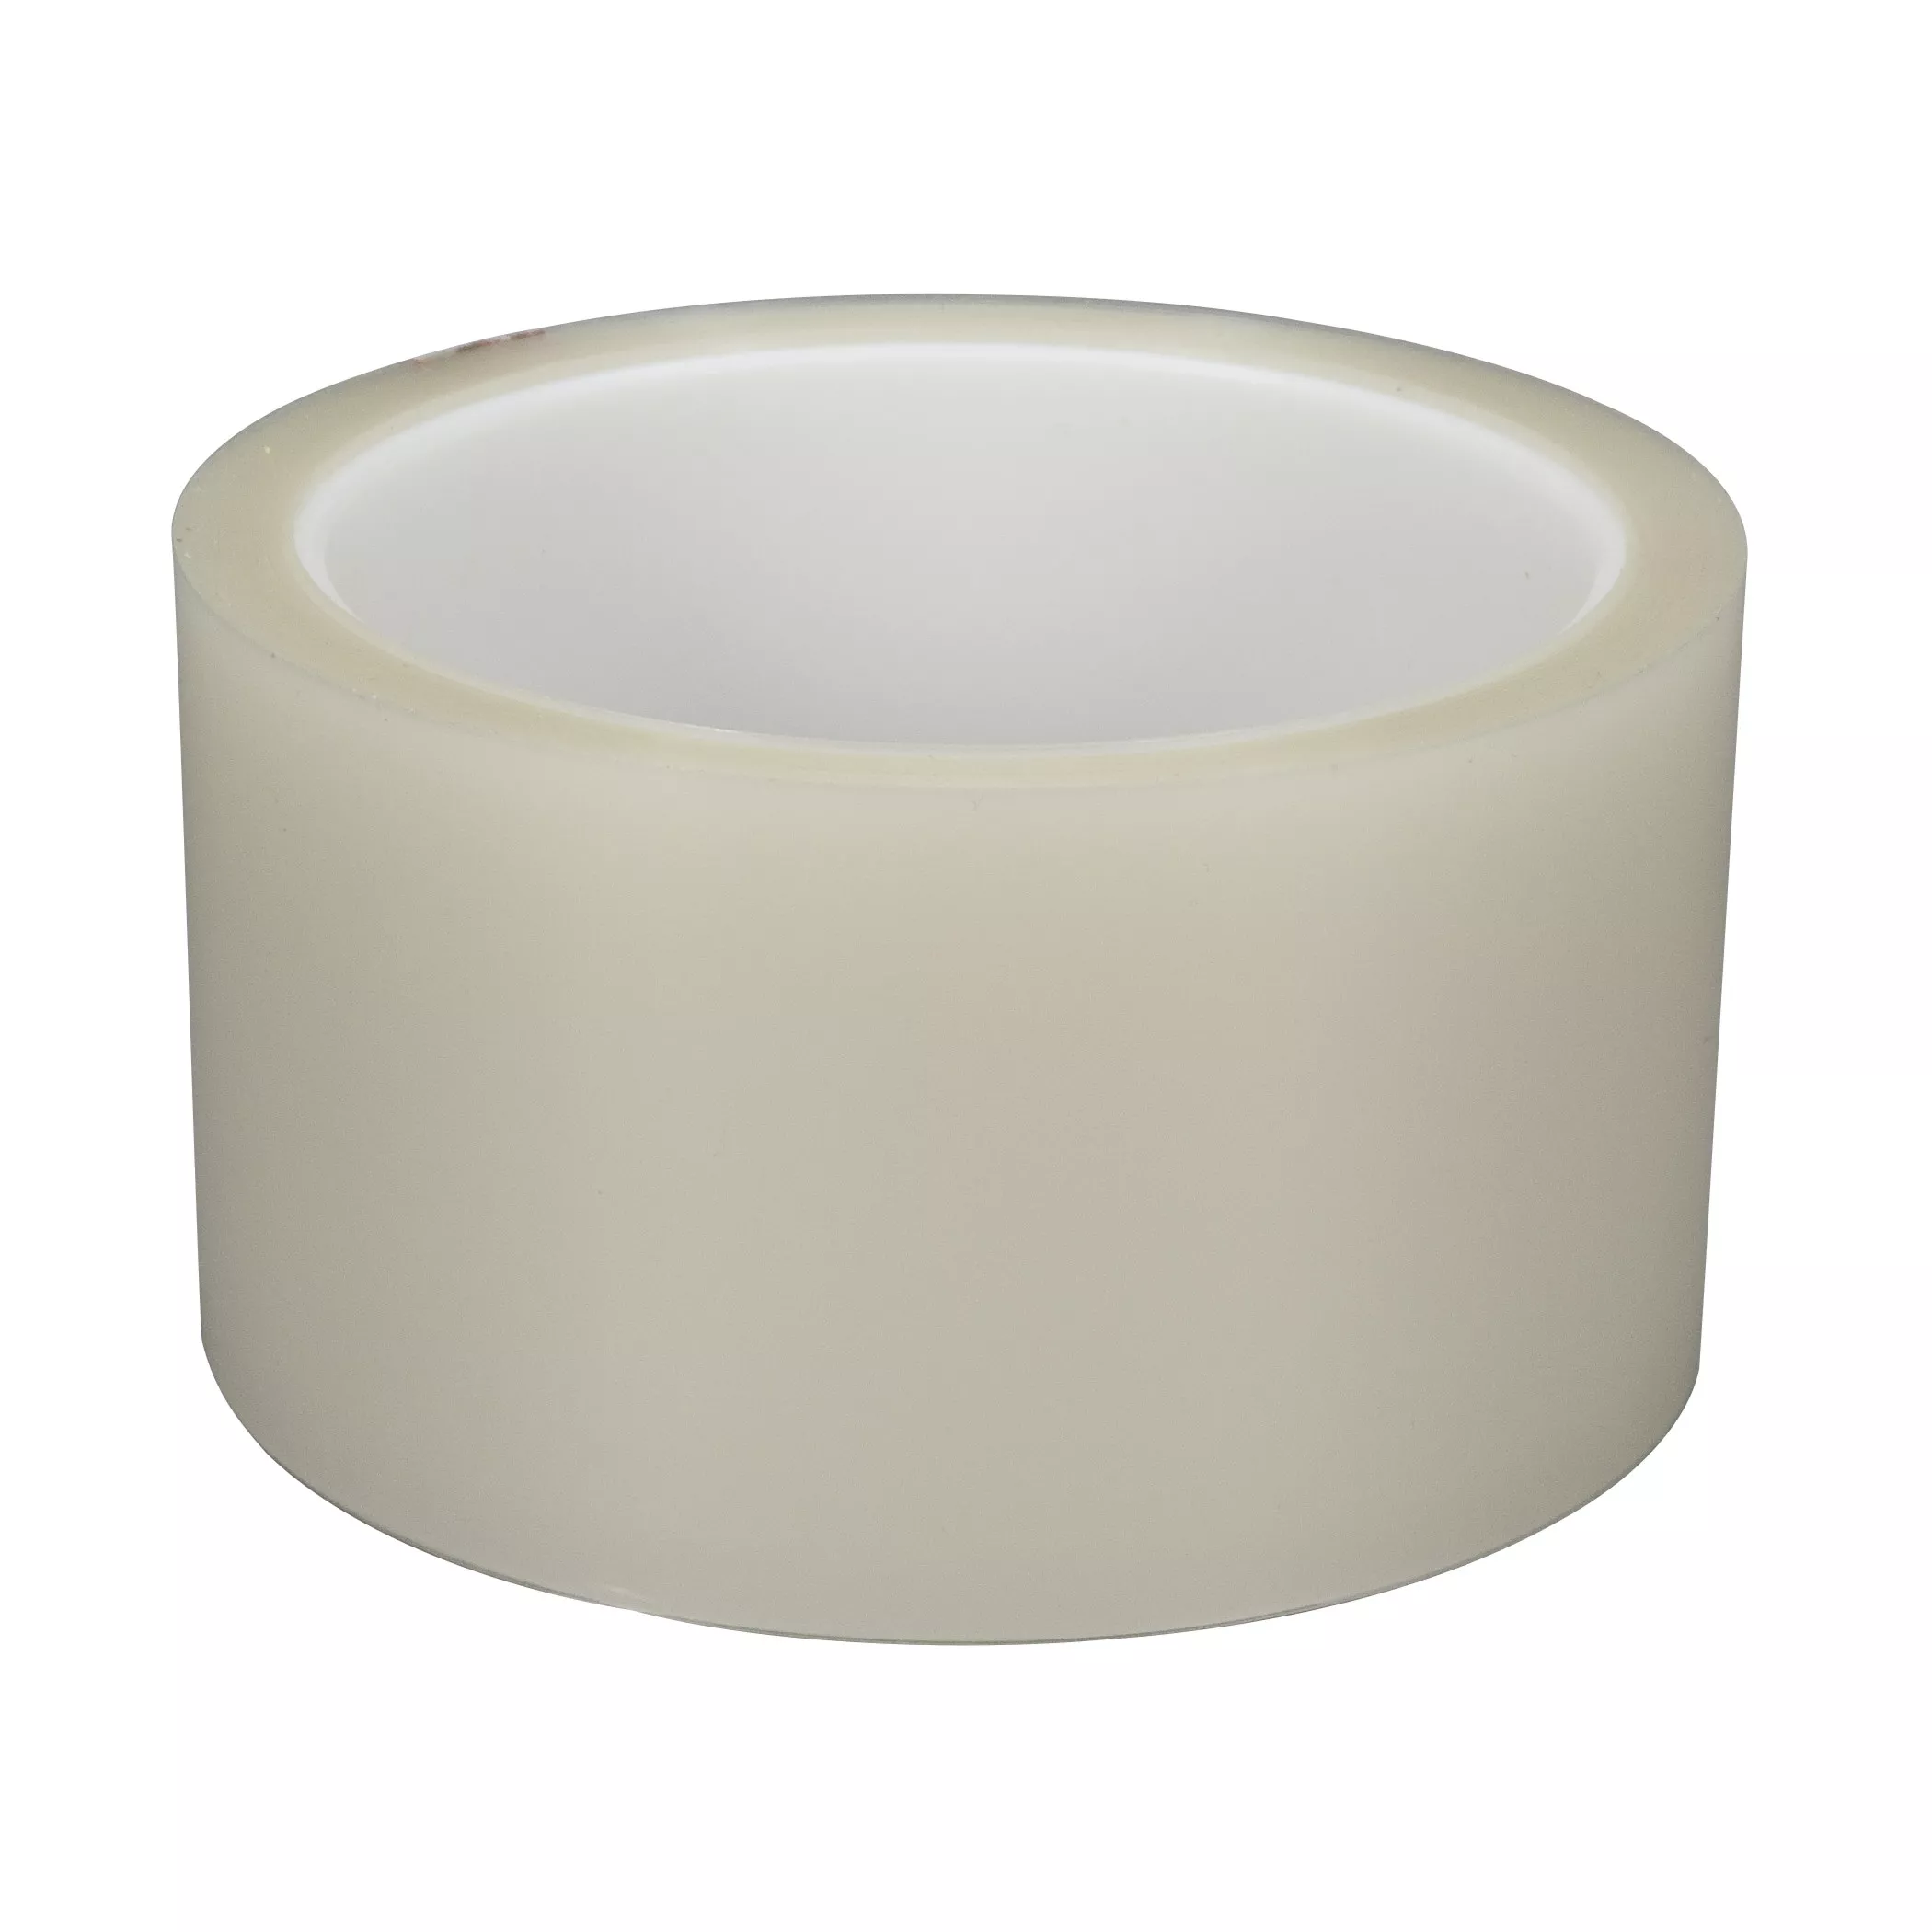 3M™ Polyester Film Tape 853, Transparent, 3 in x 72 yd, 2.2 mil, 12
Rolls/Case